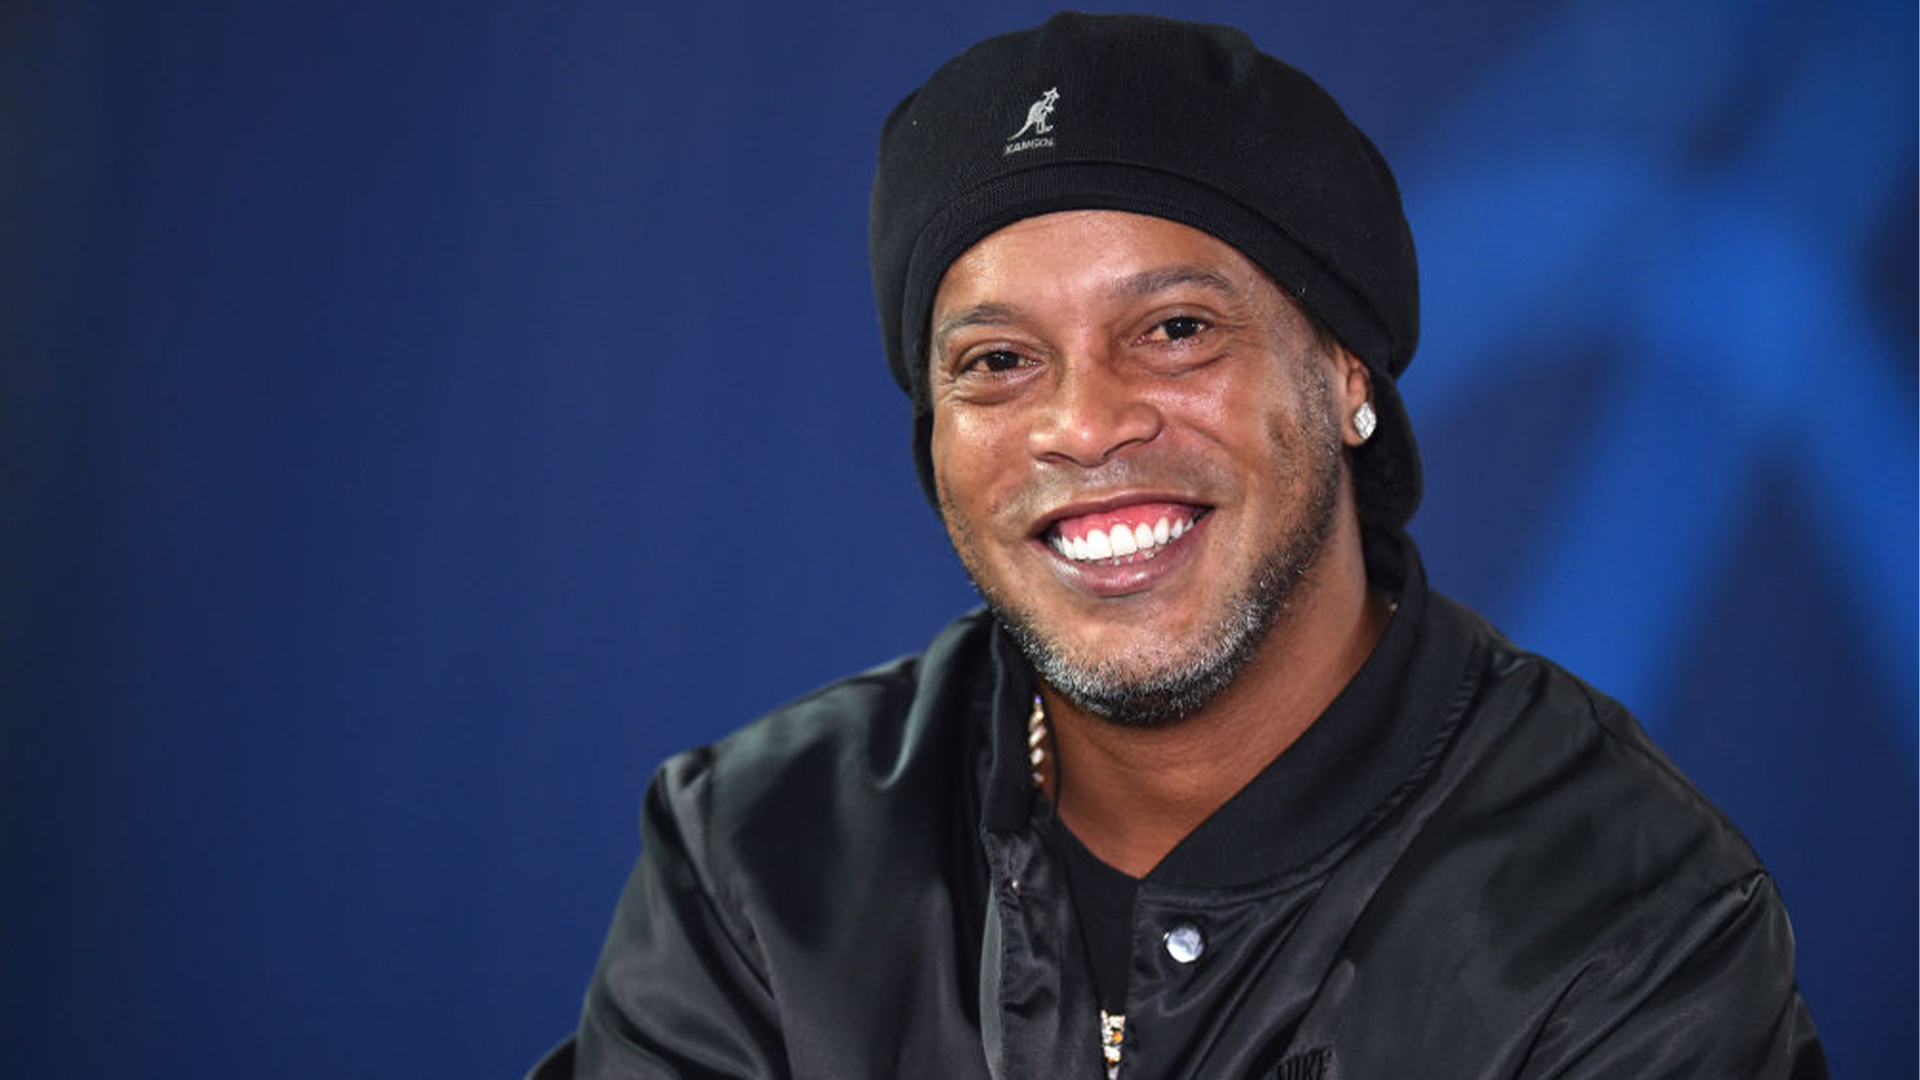 Former Soccer Player Ronaldinho Has A $90M Fortune But Once Lost A $750K Contract For Taking A Sip Of Pepsi